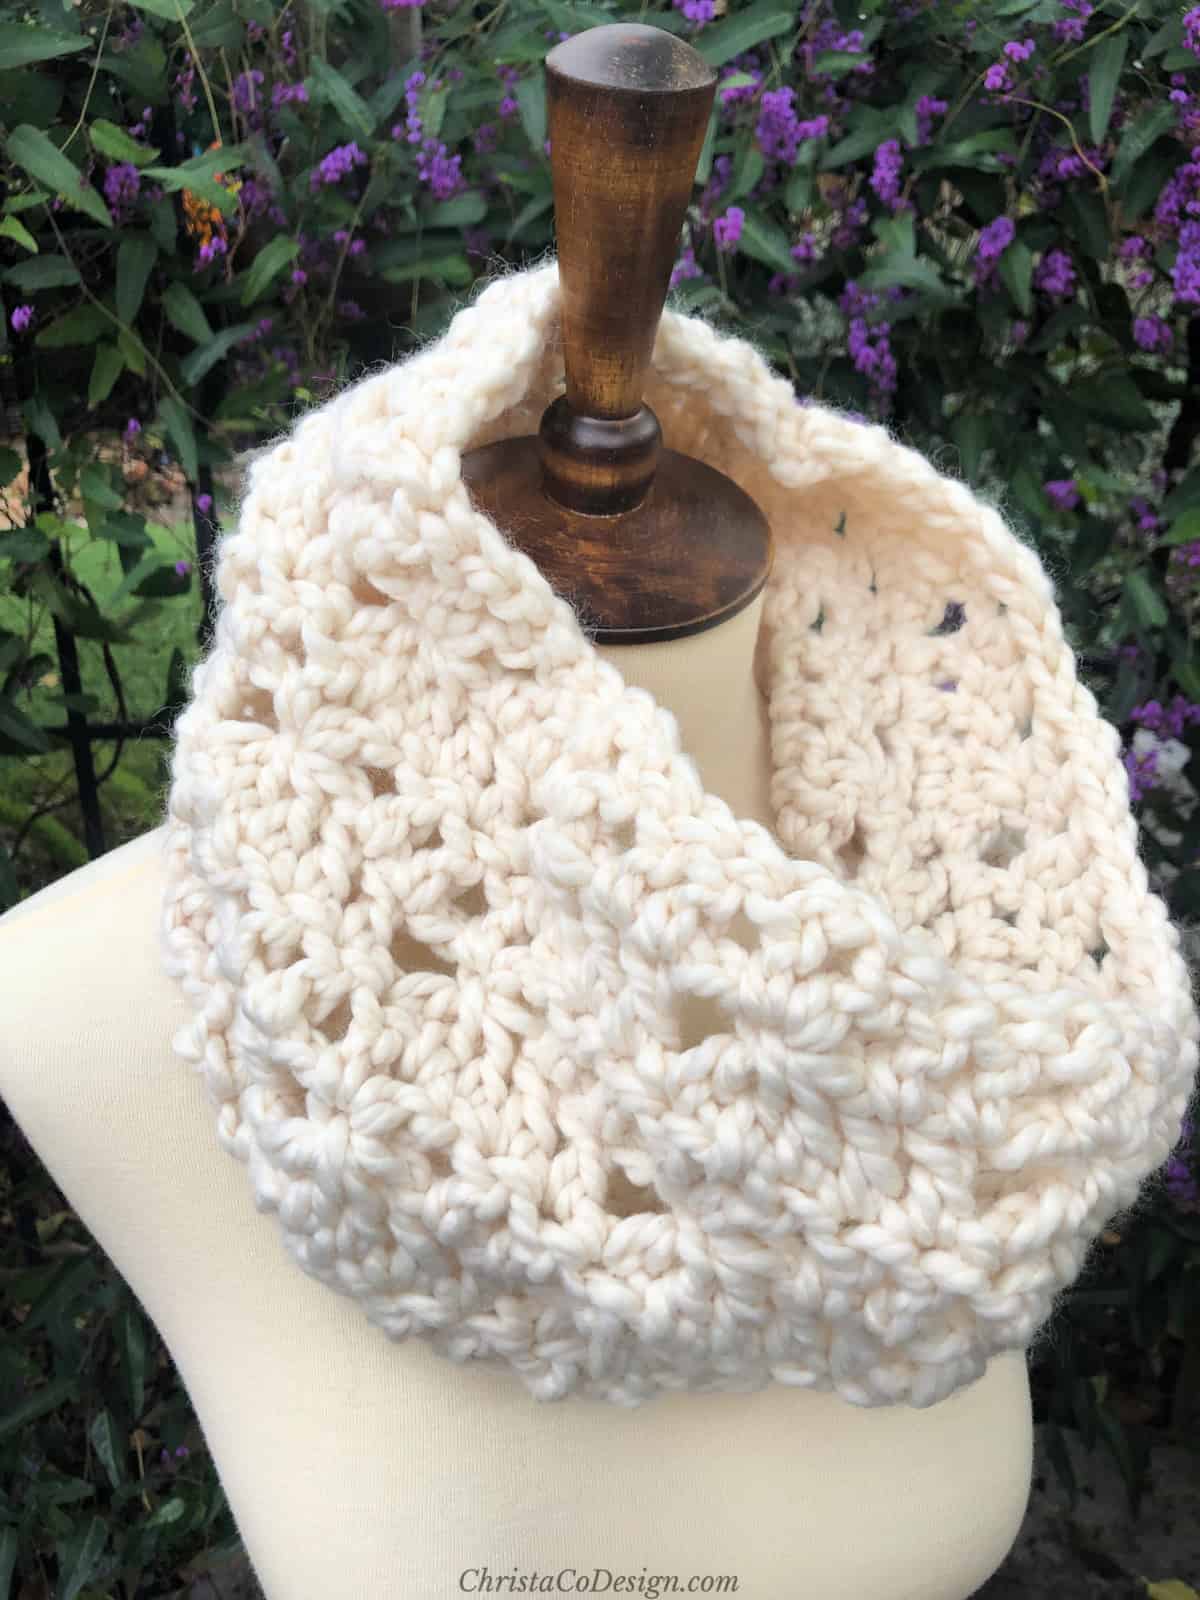 Cream crochet cowl with pretty stitches on mannequin outside.